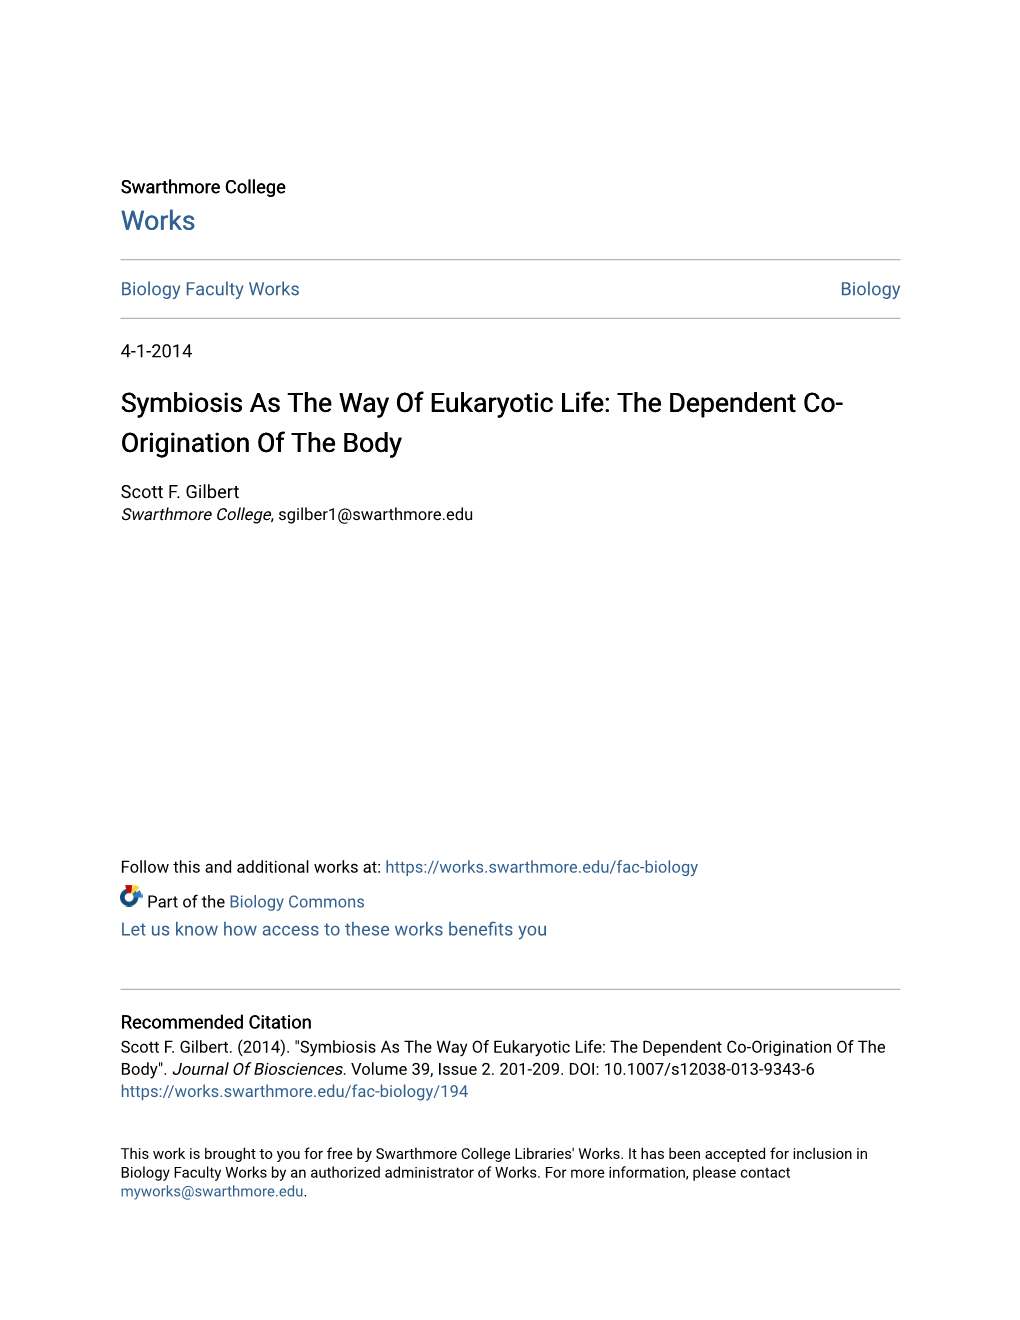 Symbiosis As the Way of Eukaryotic Life: the Dependent Co- Origination of the Body